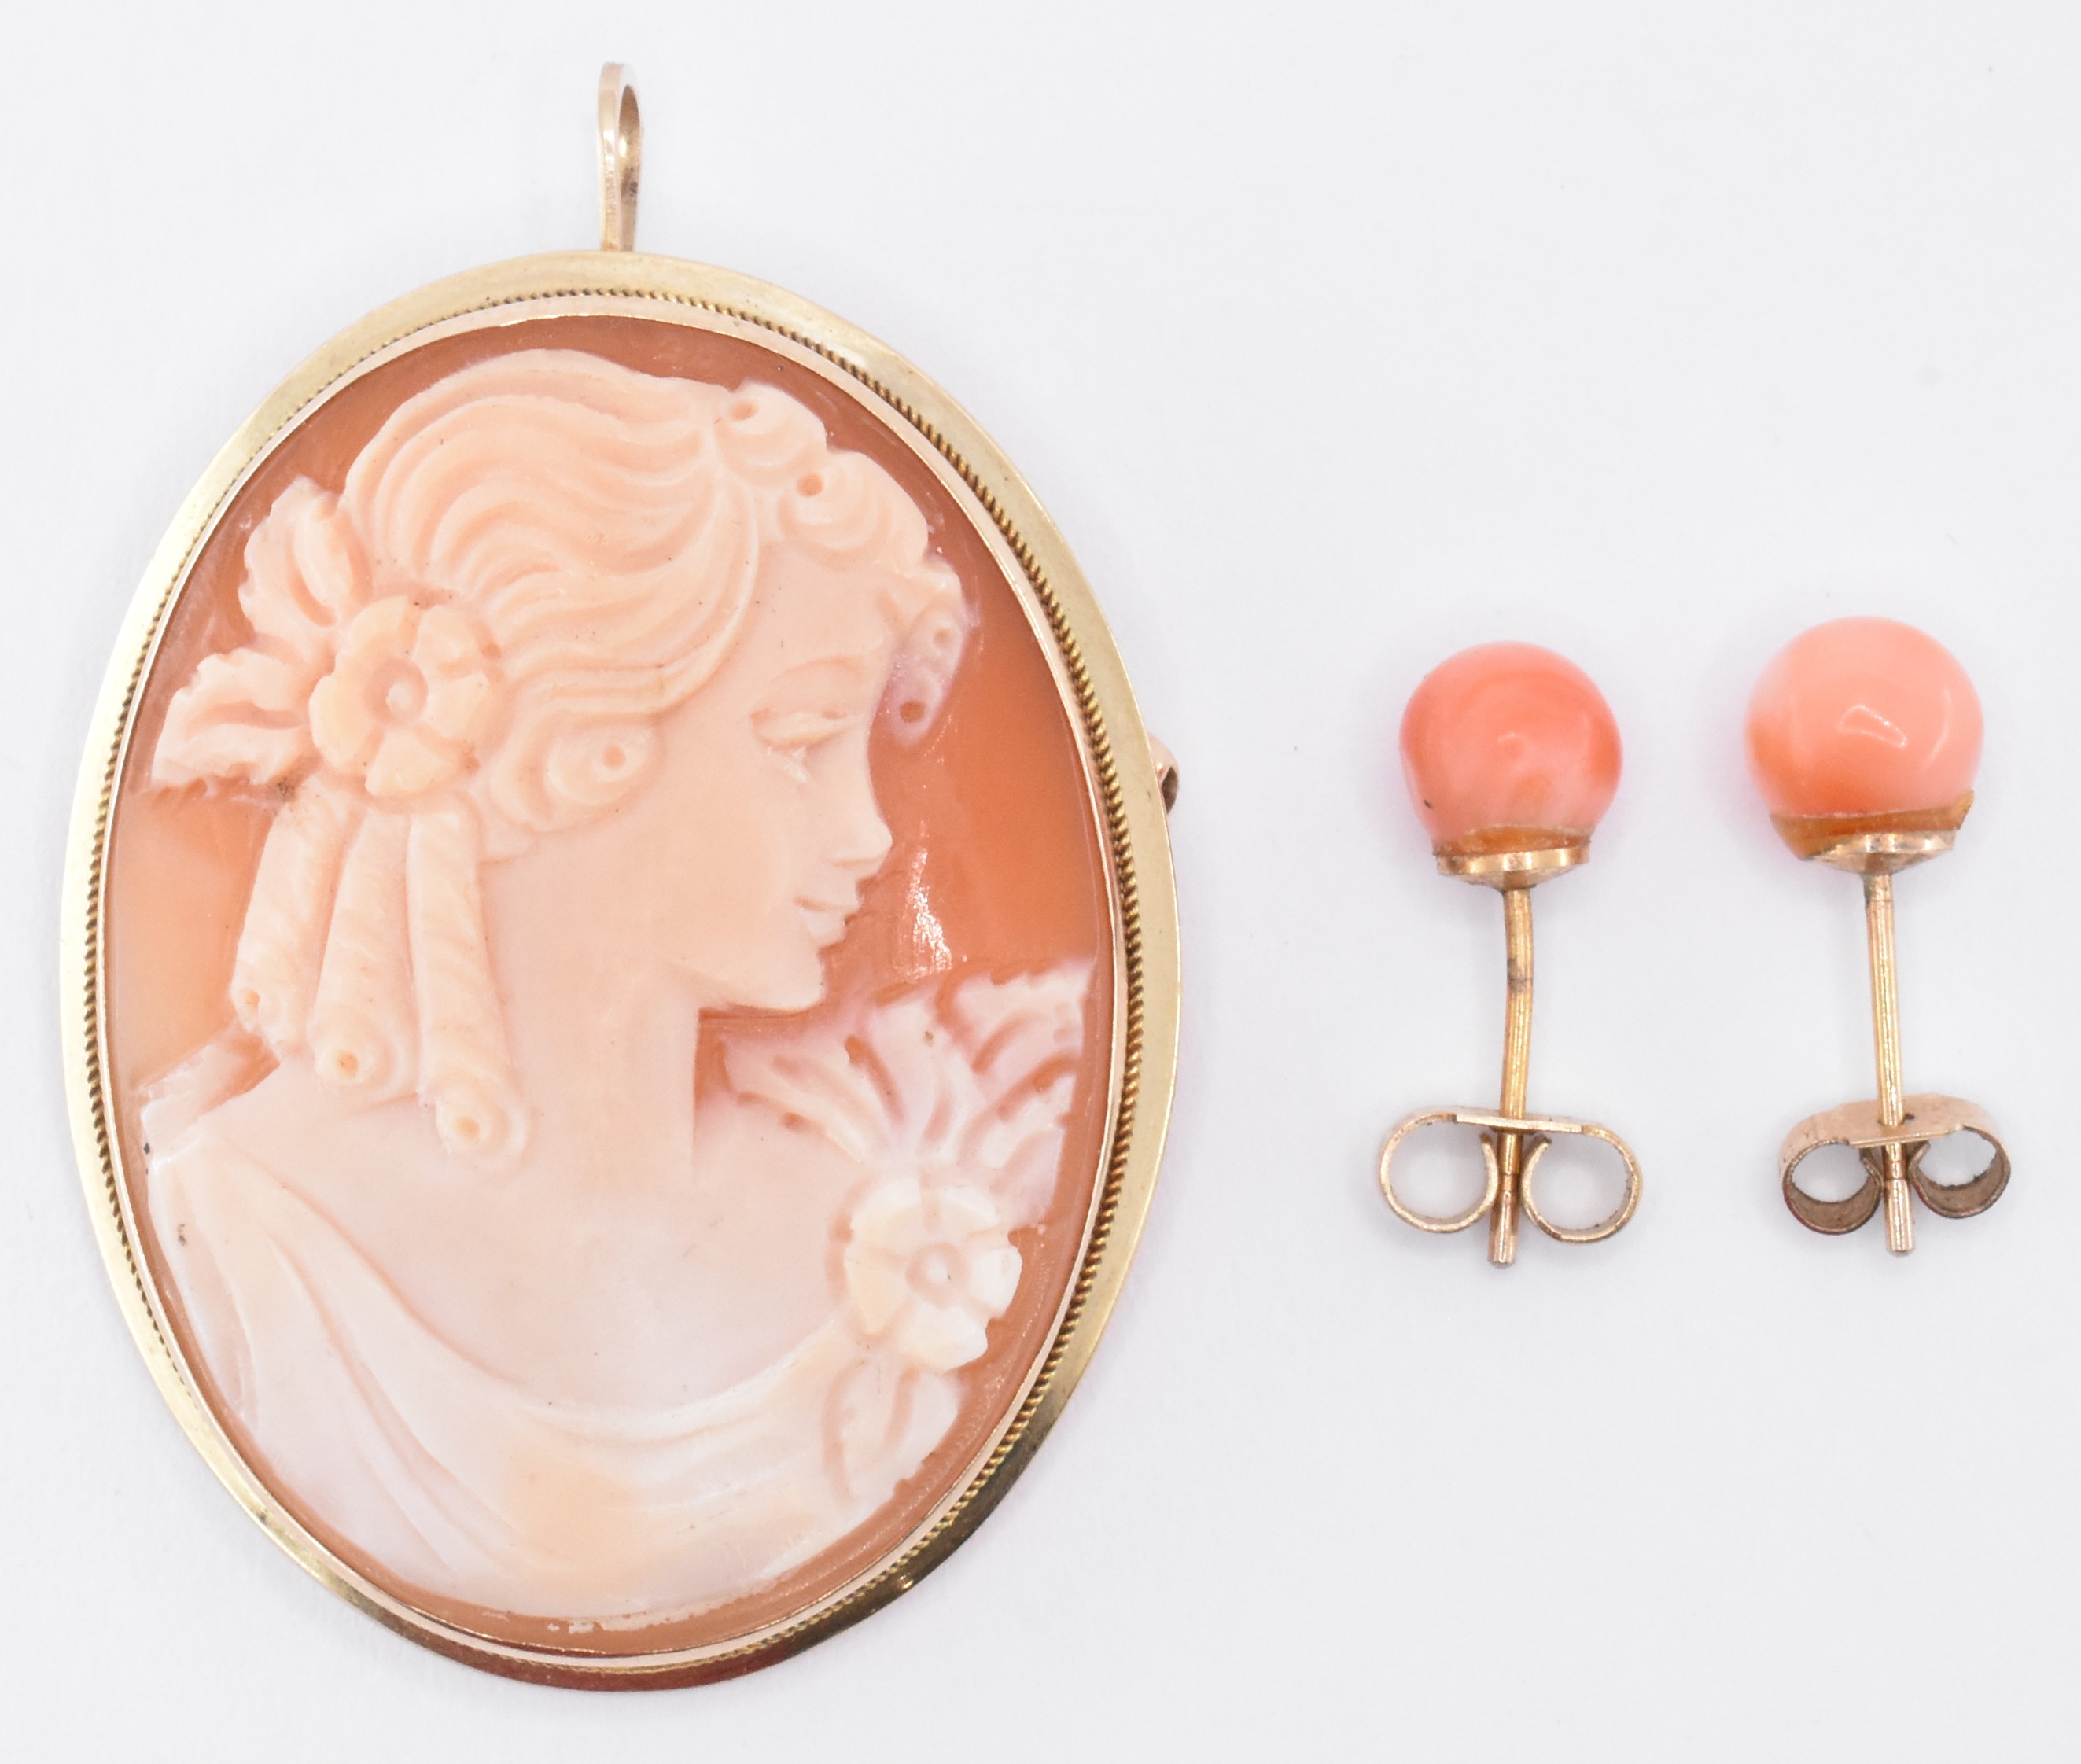 9CT GOLD CAMEO BROOCH & CORAL EARRINGS - Image 2 of 5